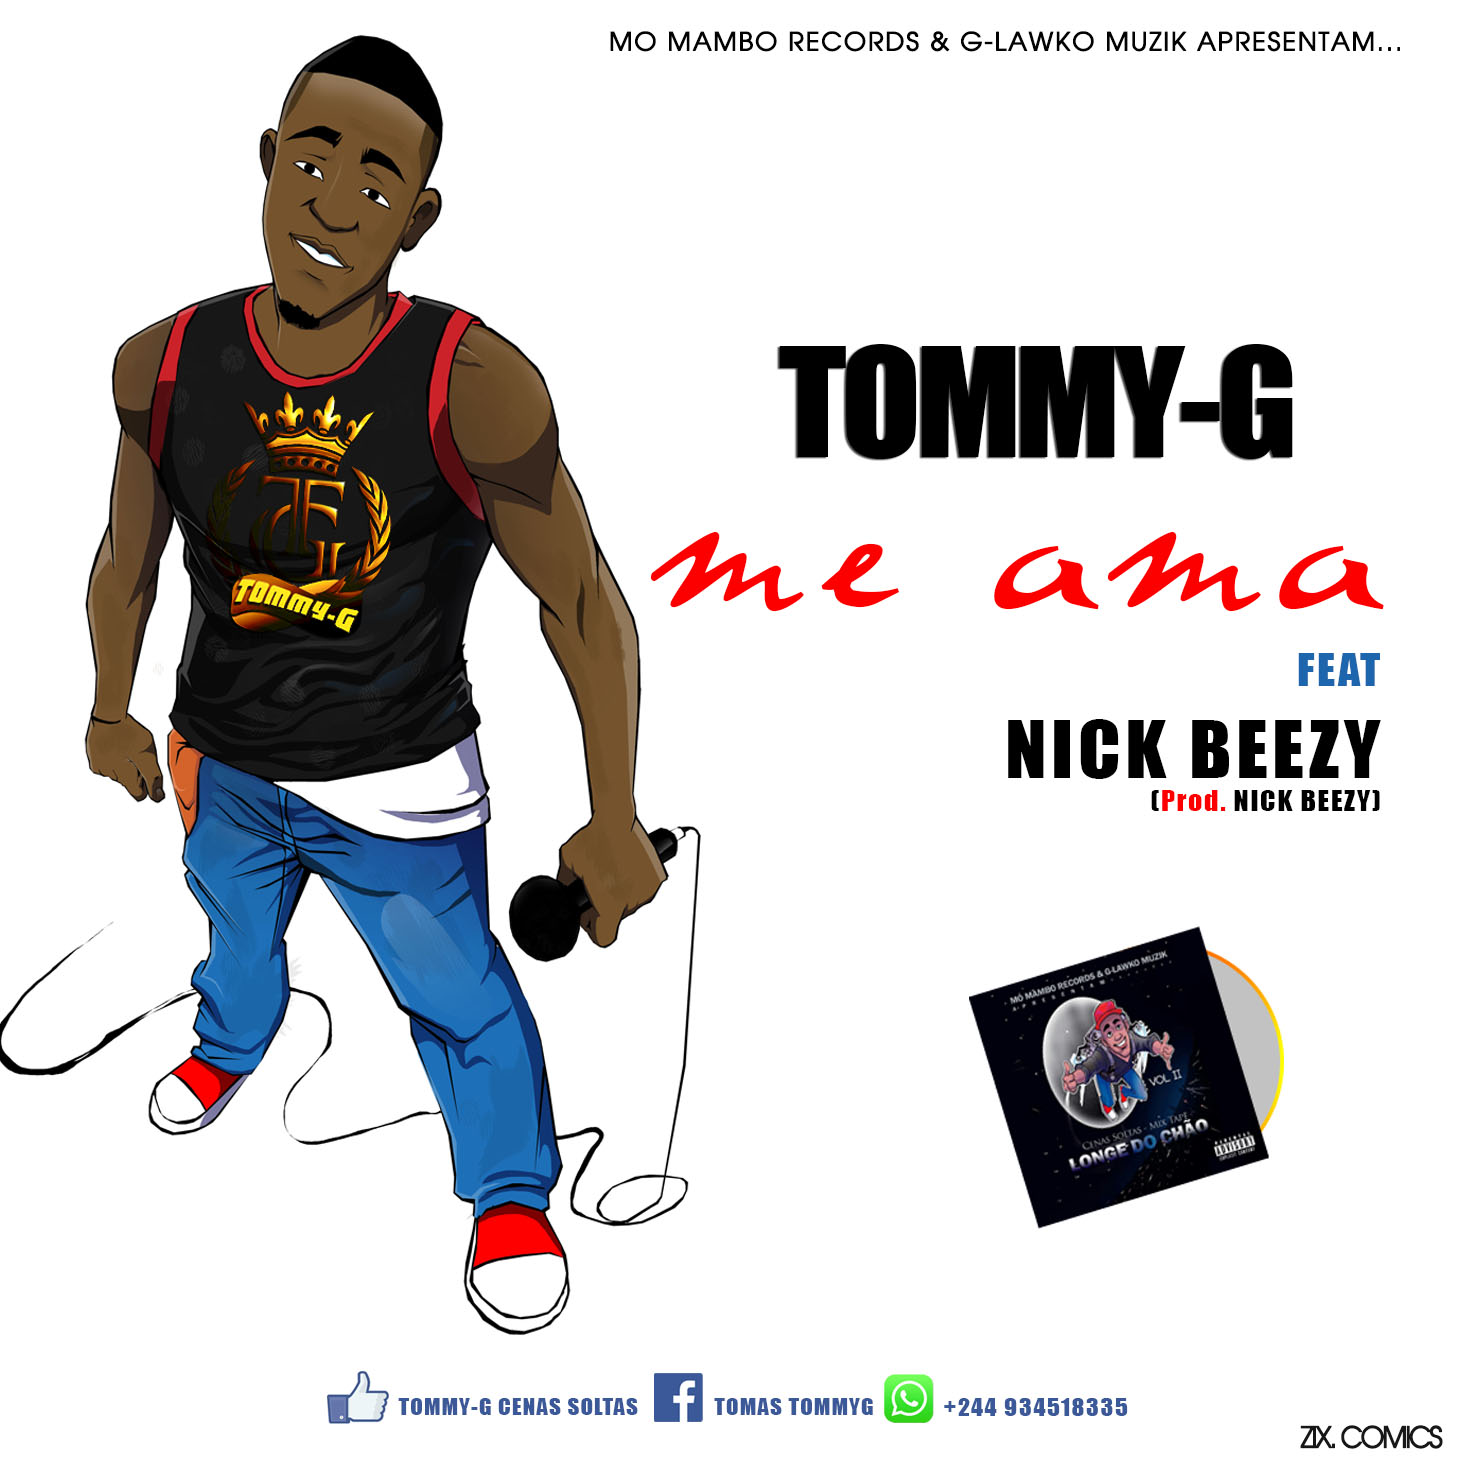 tommy g - me ama feat nick beezy